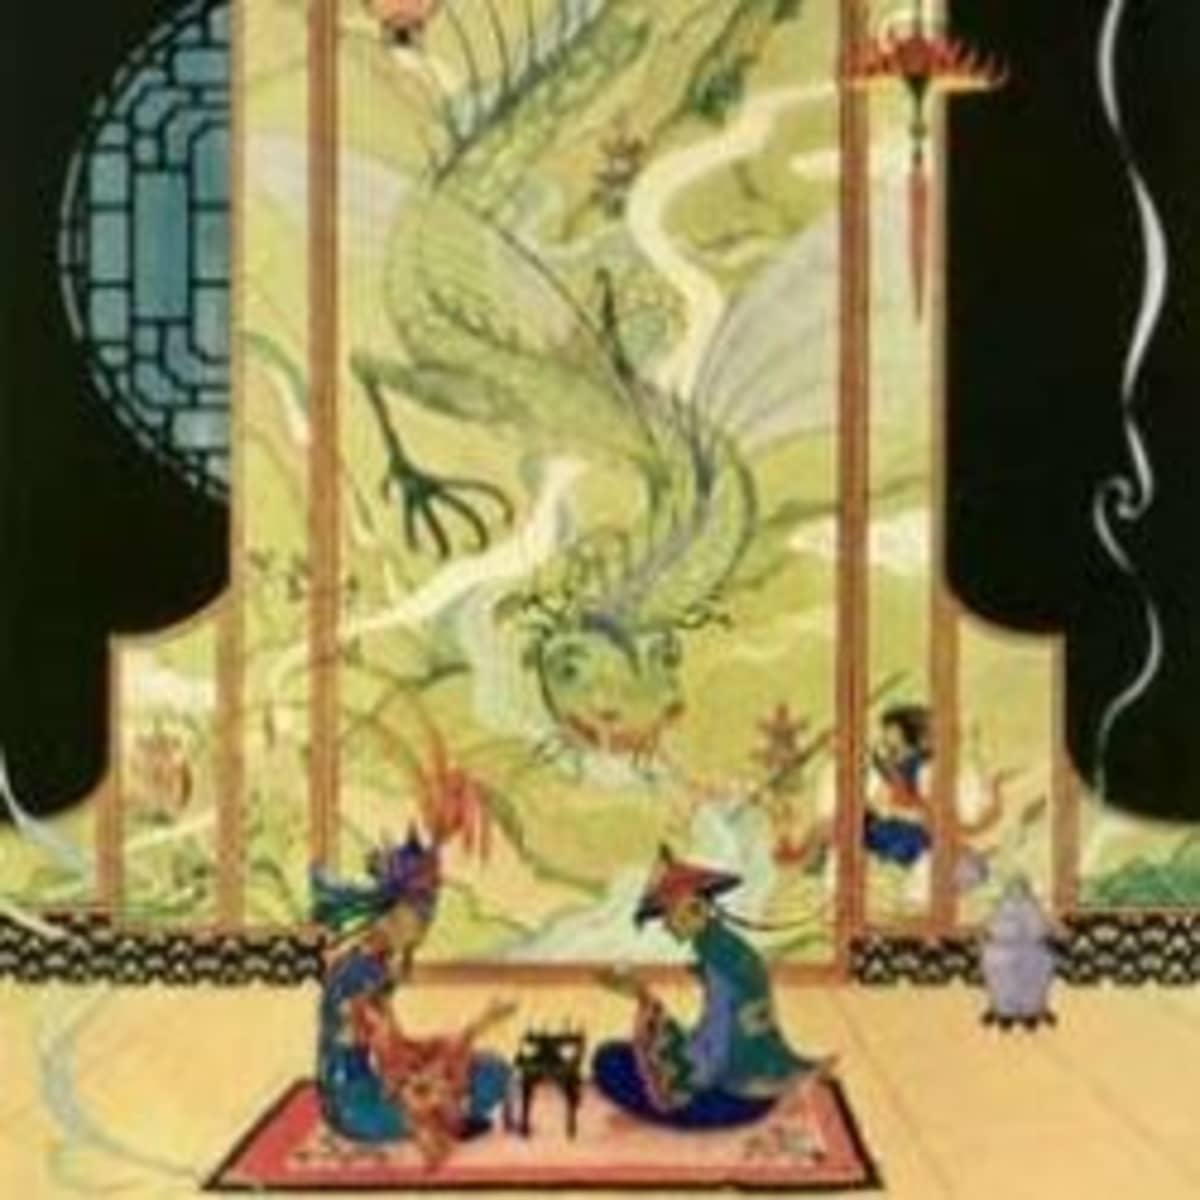 The stories of Arabian Nights (1001 Nights) - HubPages